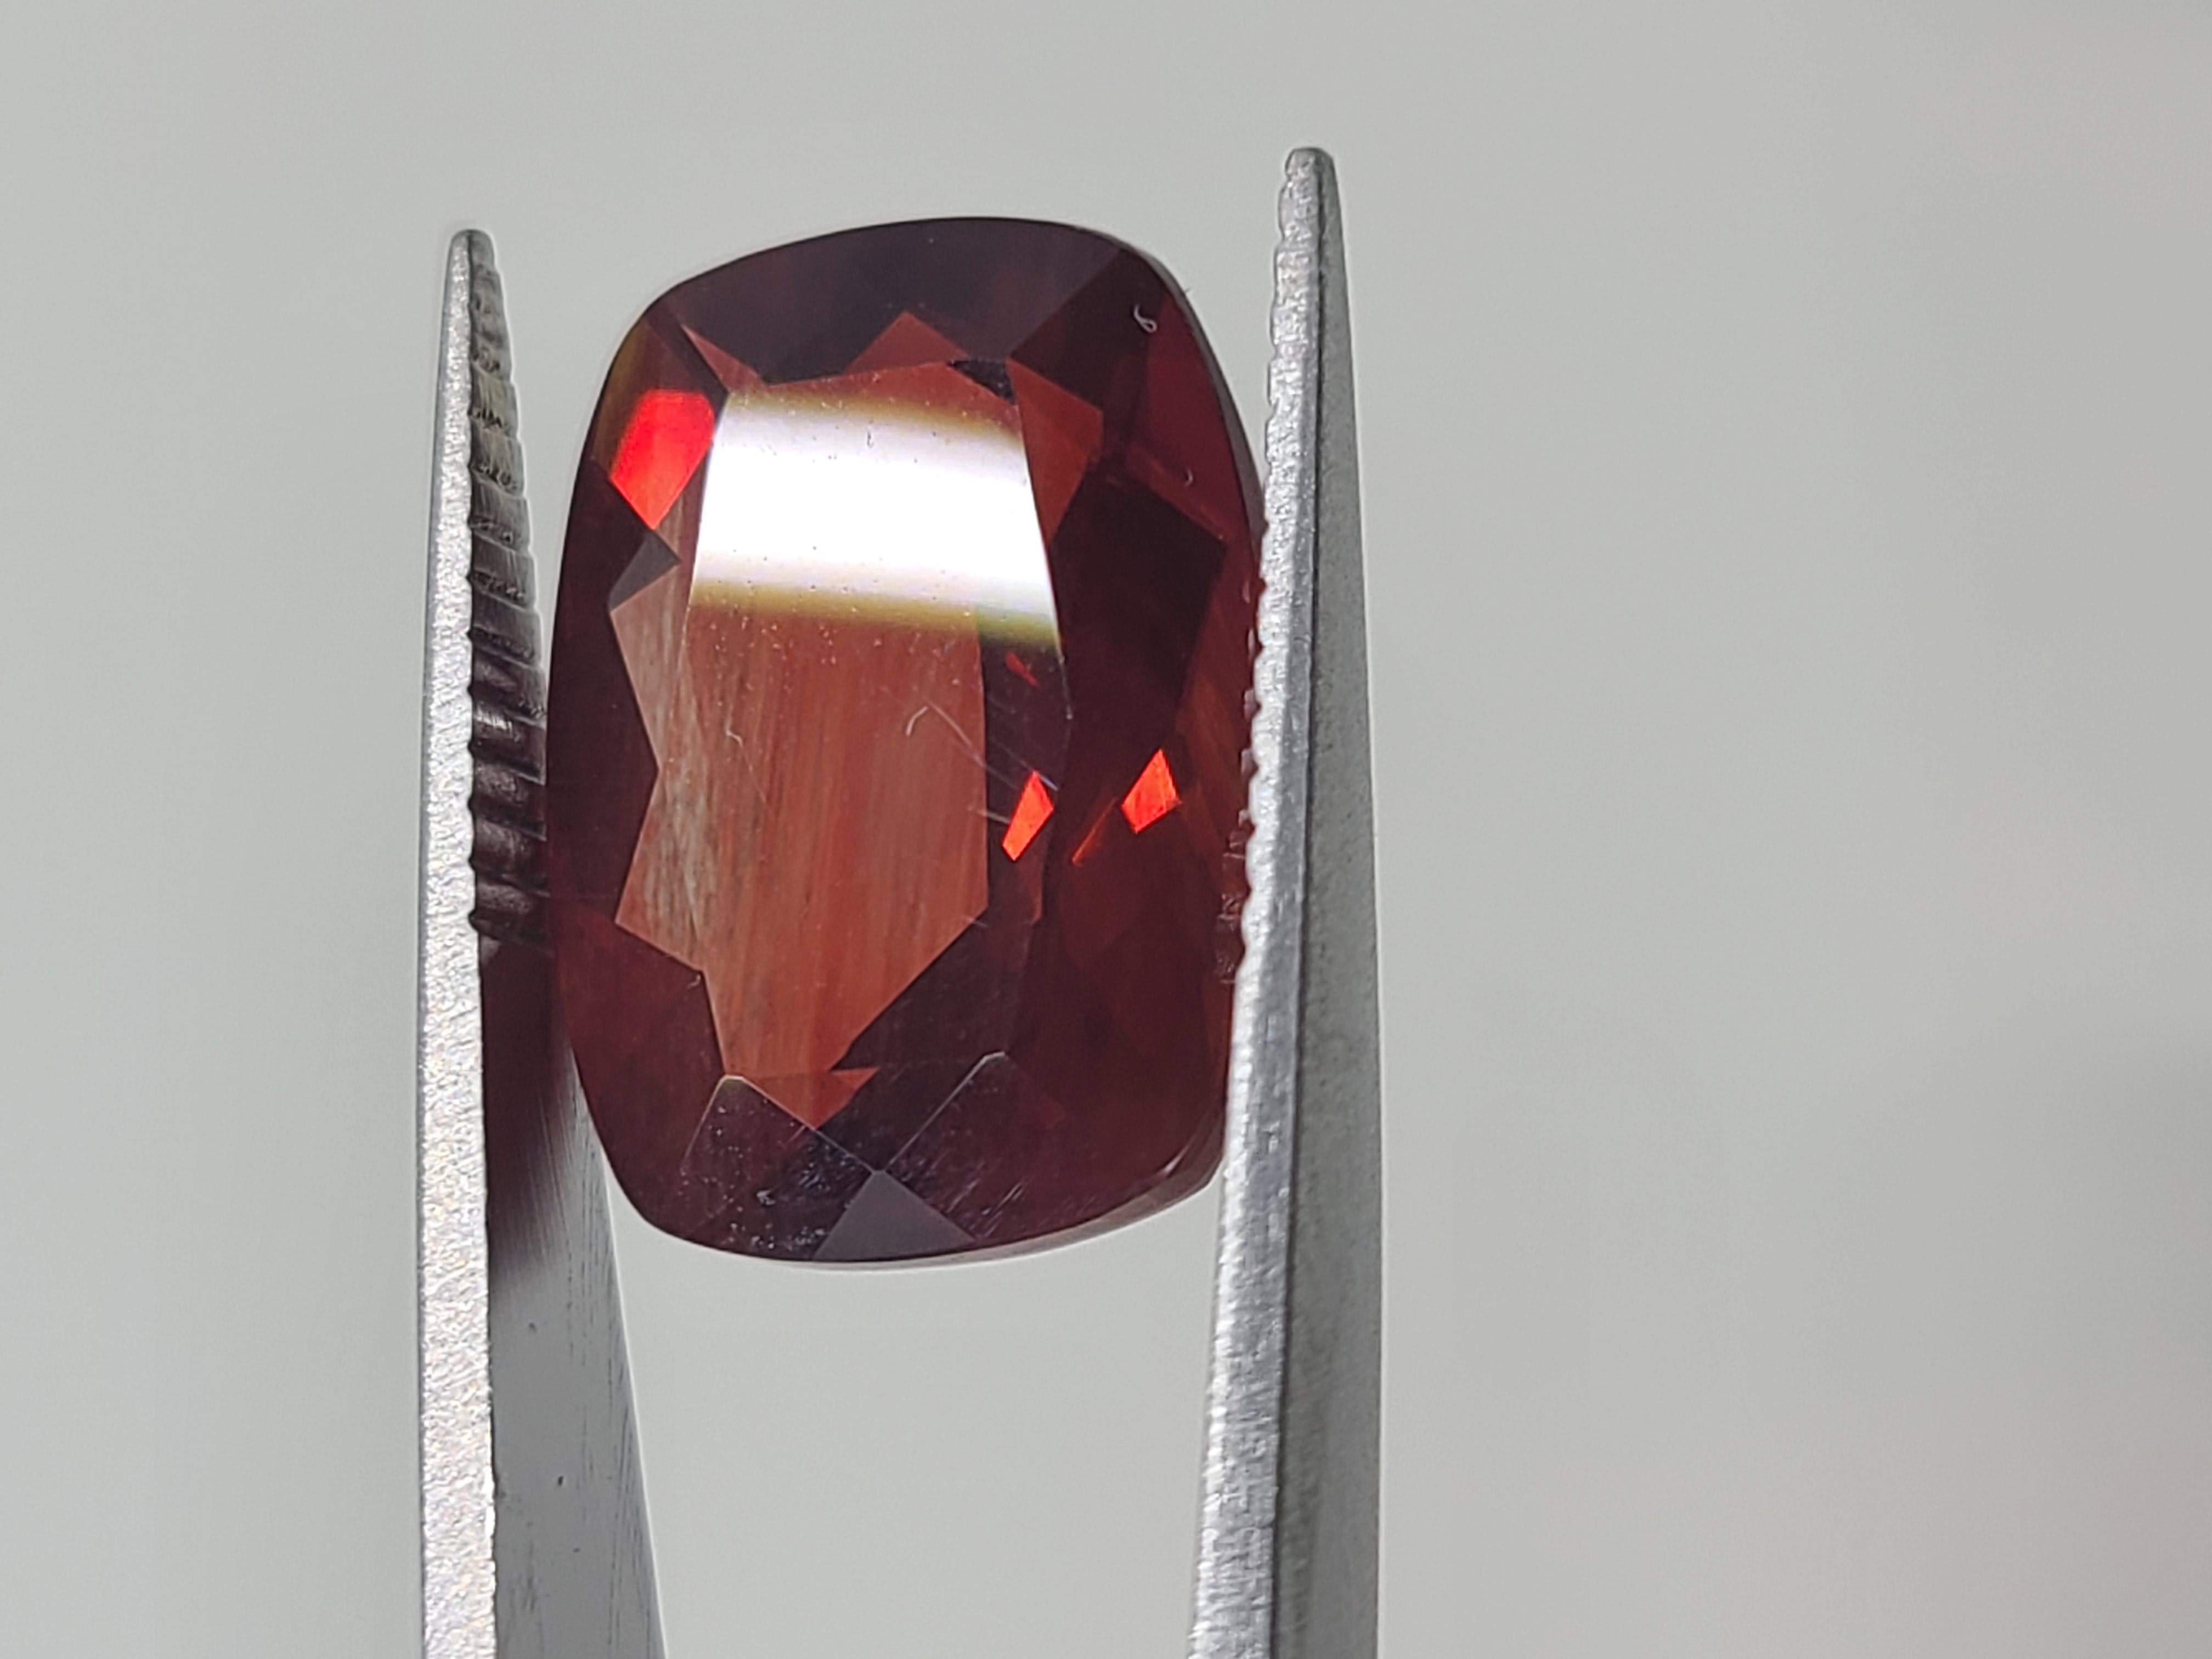 This Red Andesine Labradorite comes from the estate of a private collector. It's emerald cut measuring 16x12mm with a 7.4mm depth and weighs 9.14 carats. It is a wonderful shade of brilliant red.